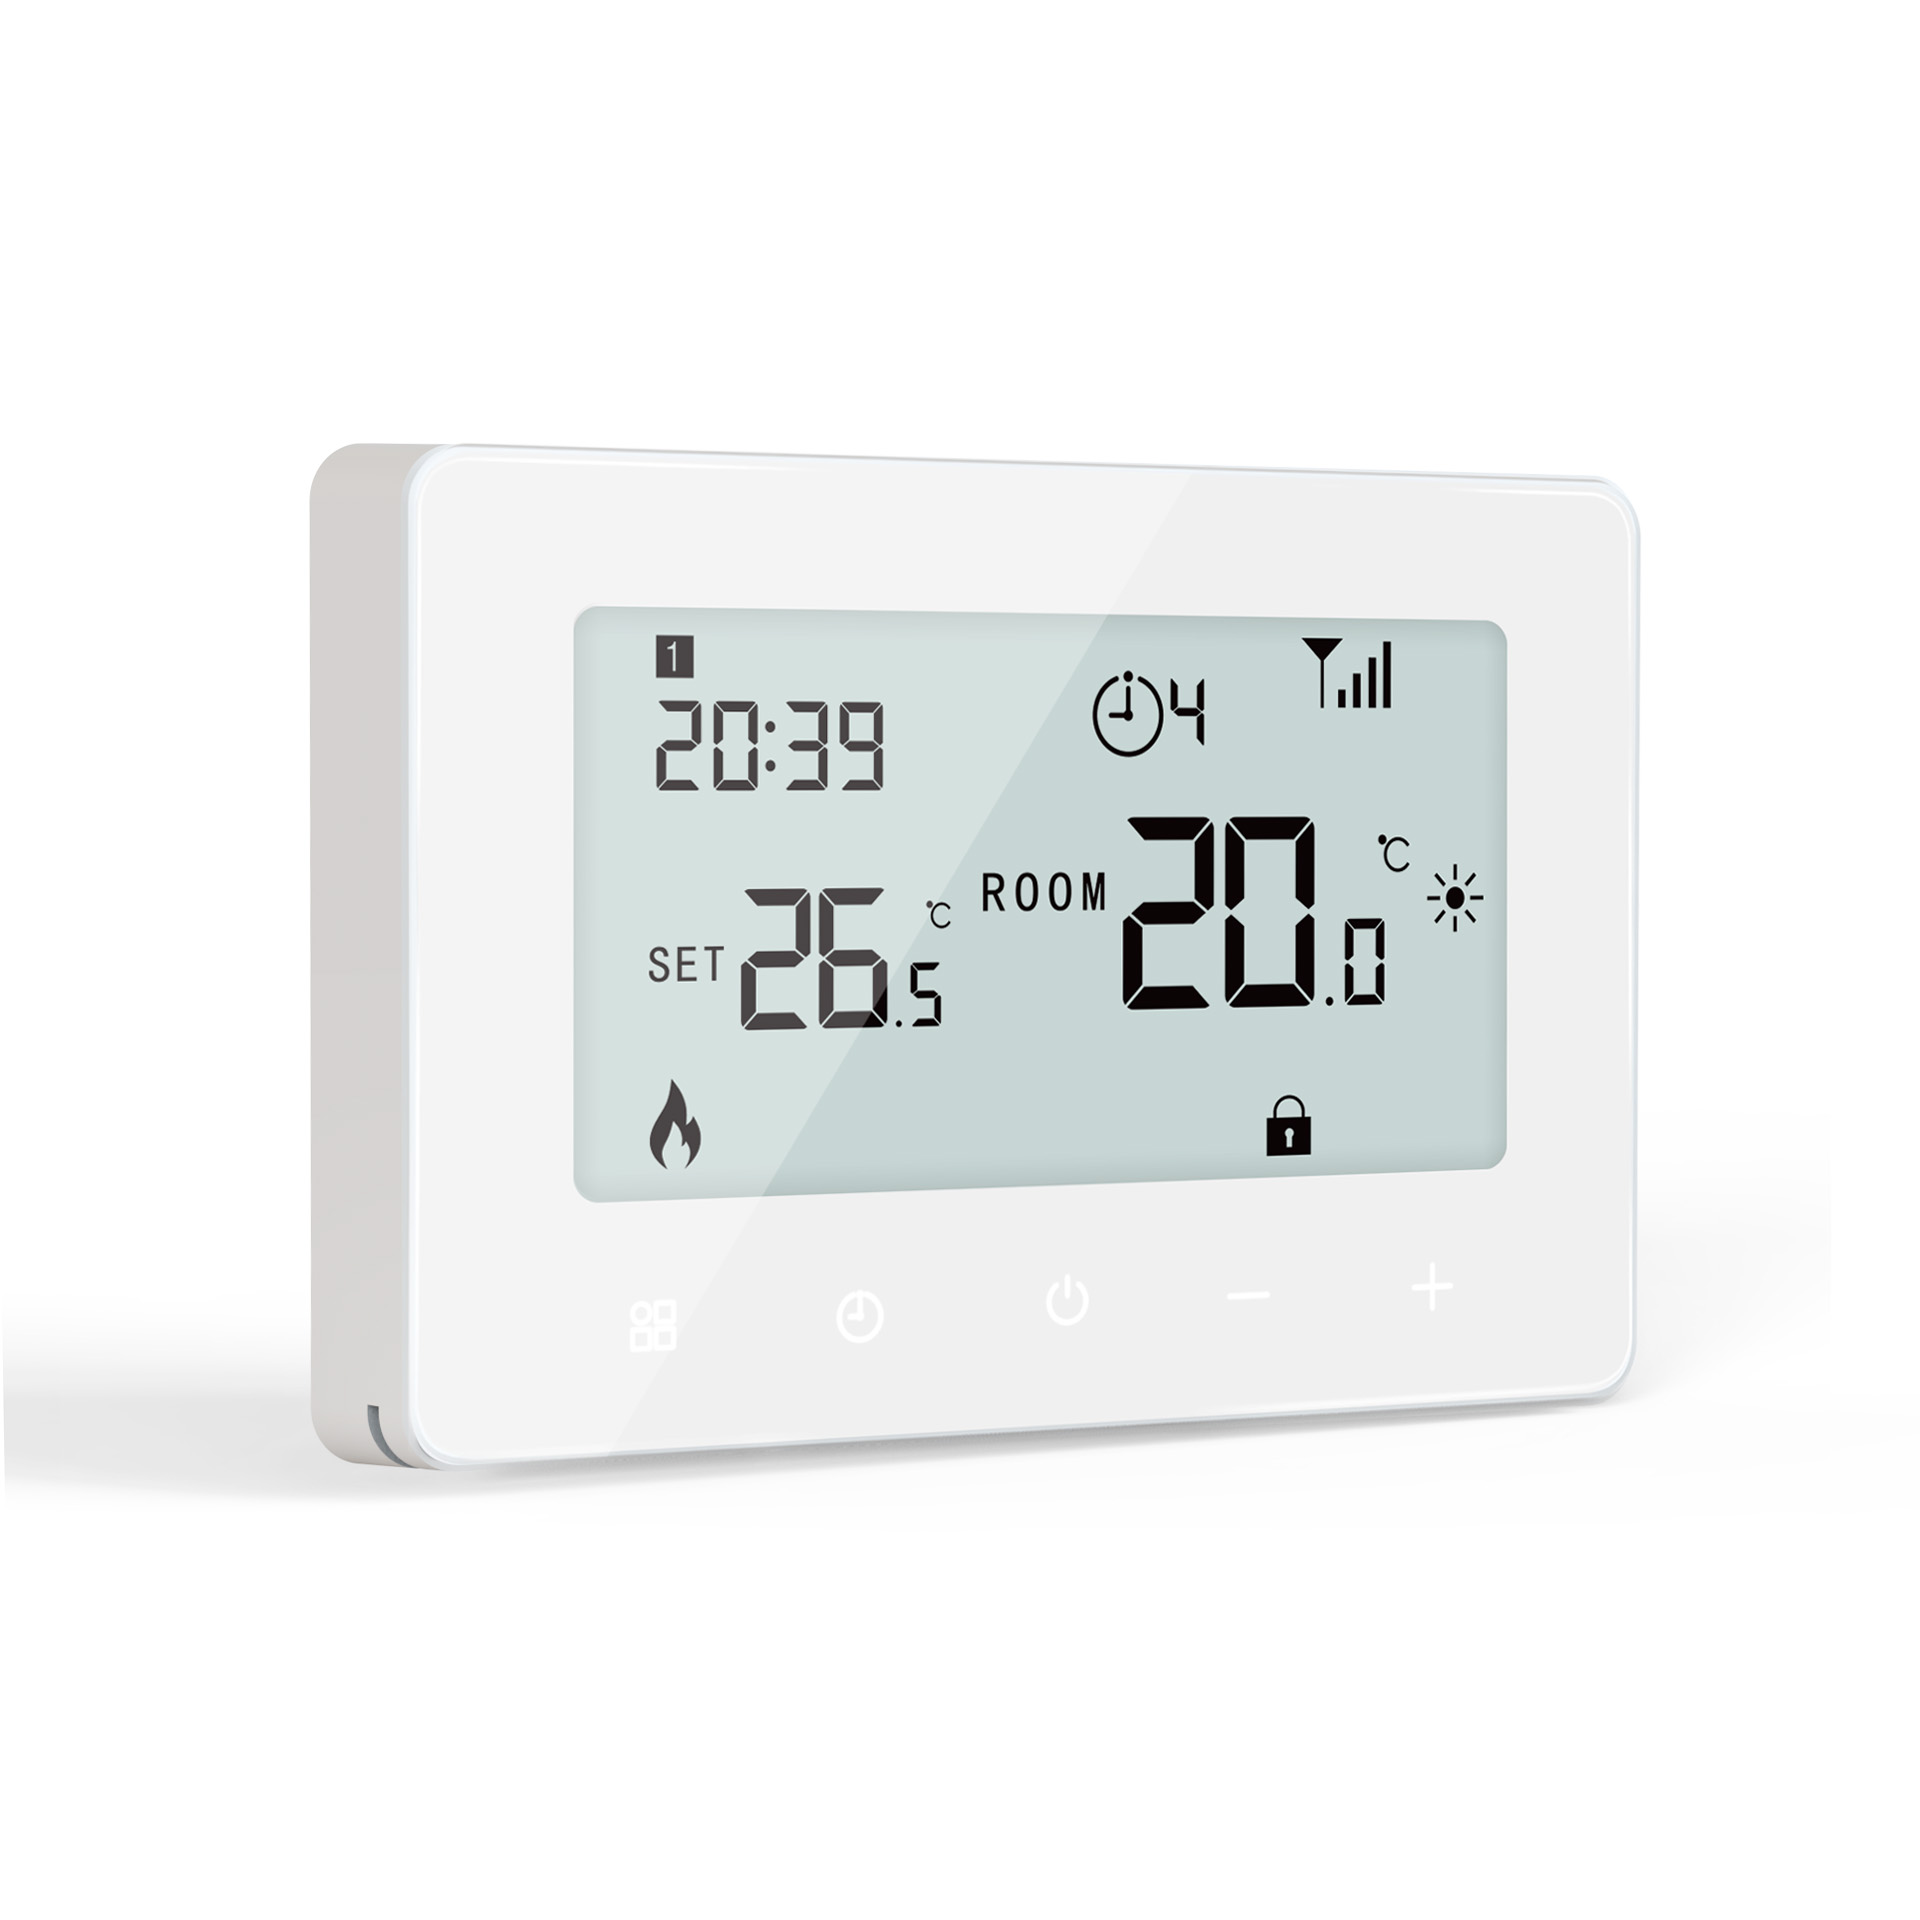 220V Wall mounted Heated floor smart thermostat